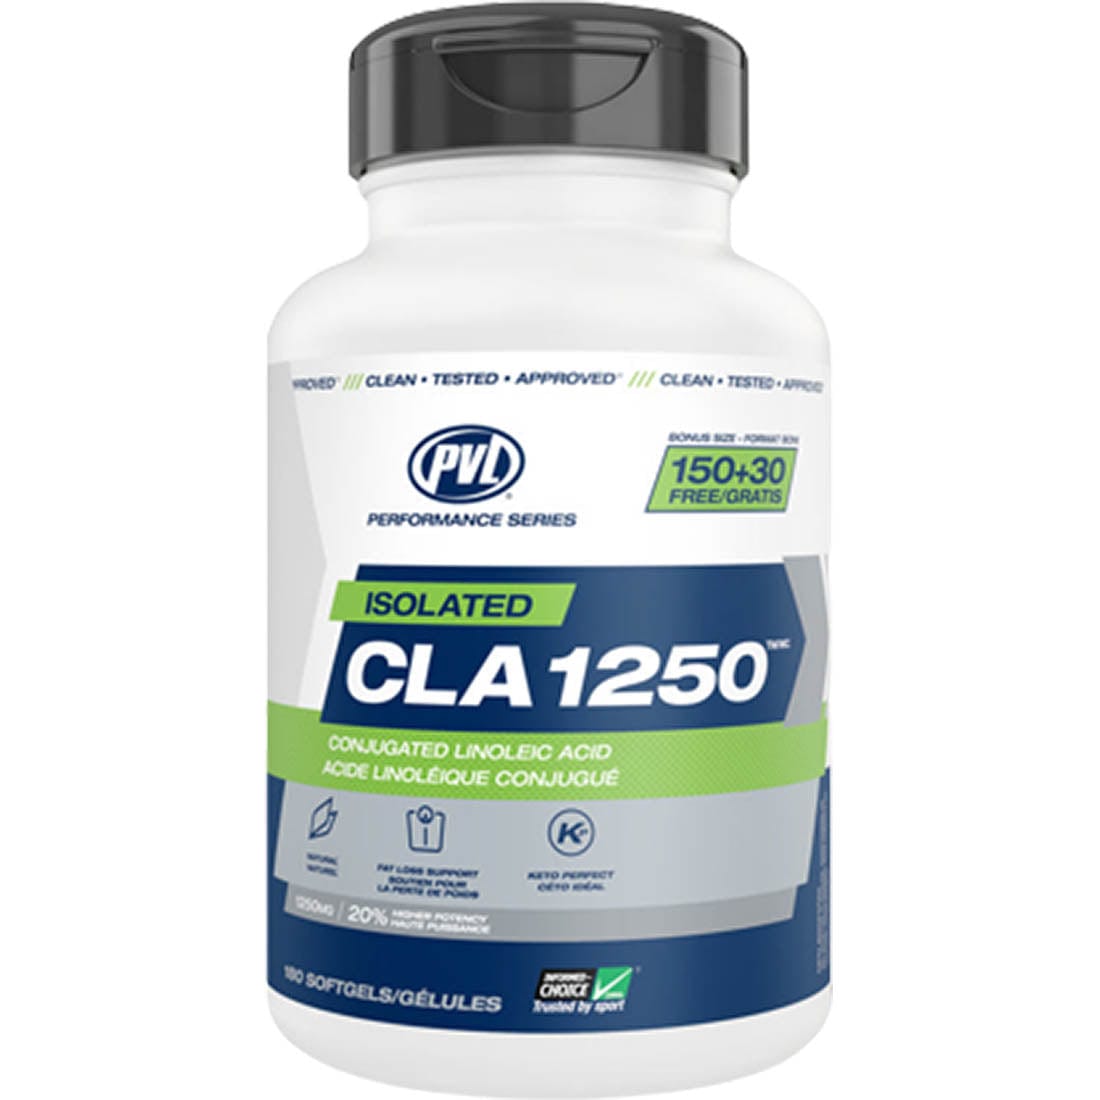 PVL Isolated CLA 1250 1250mg, 180 Softgels